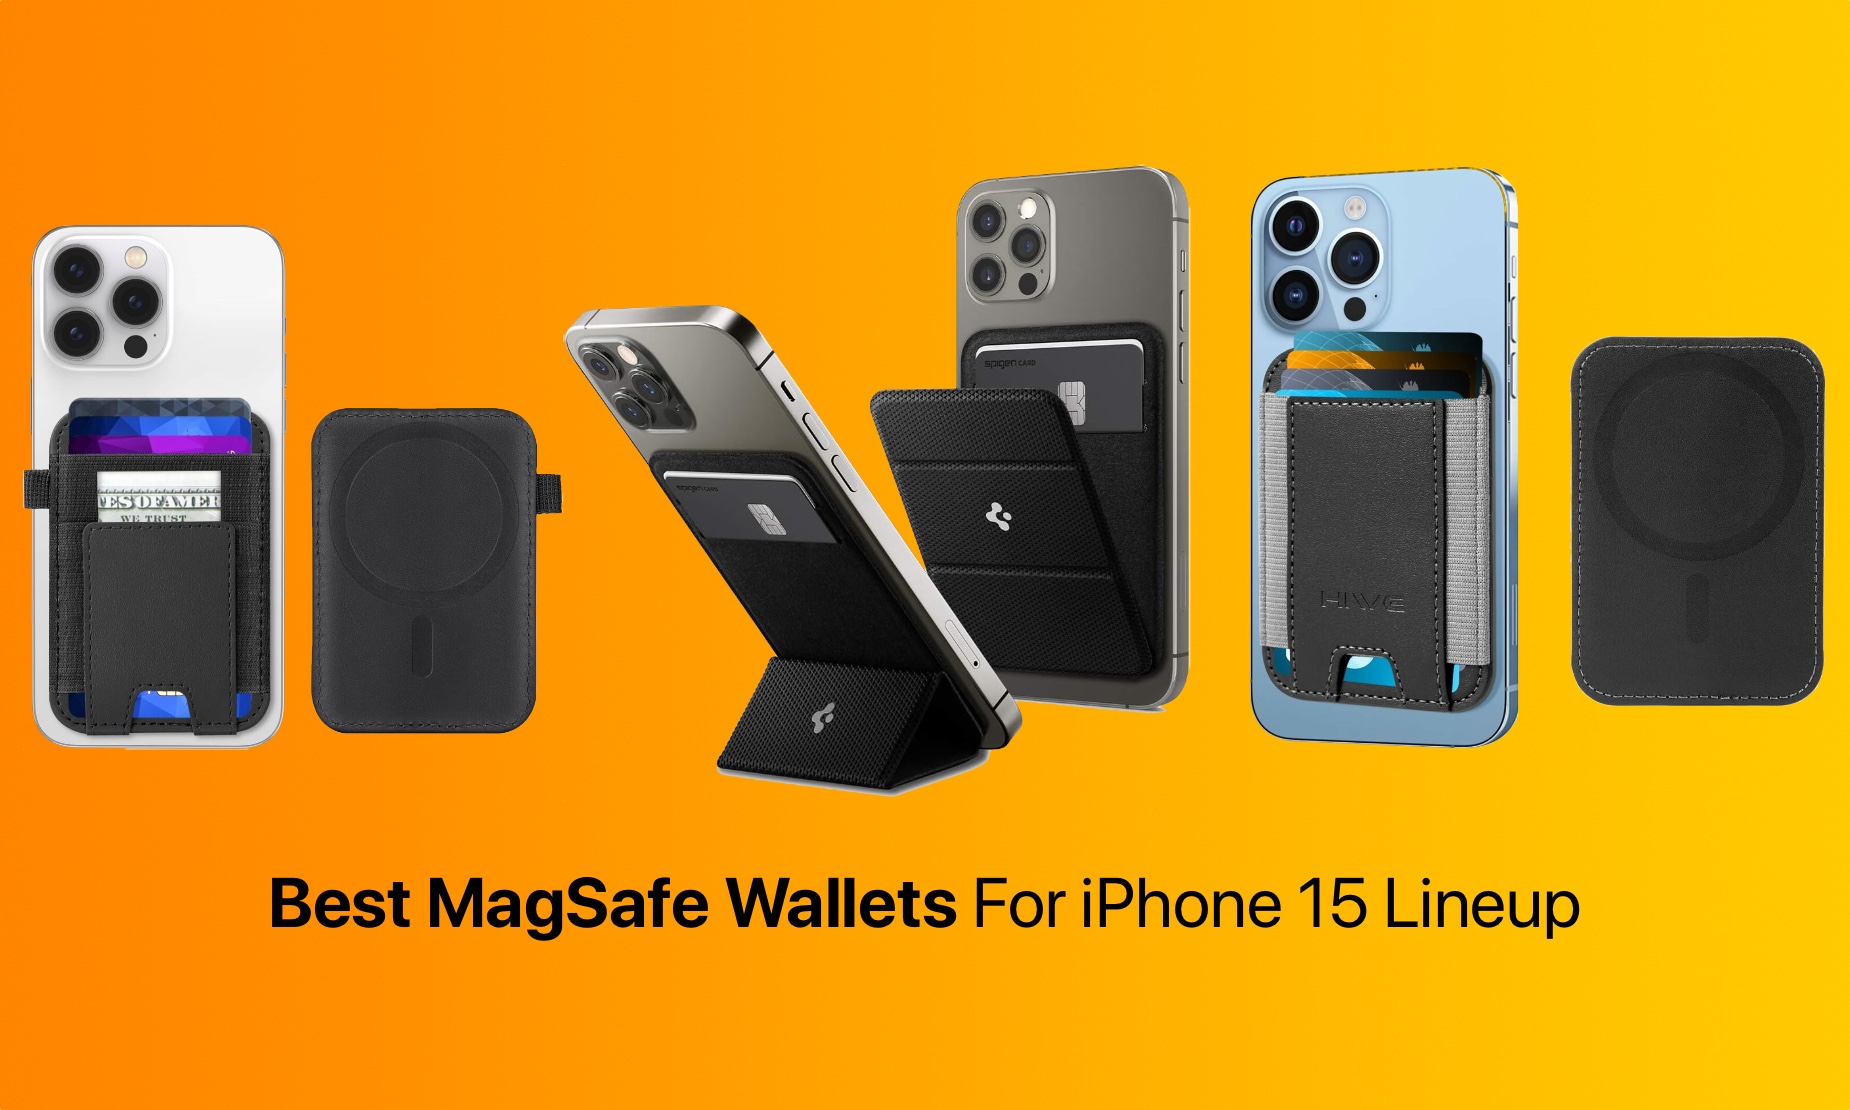 The 11 Best MagSafe Wallets for Easy, Everyday Access